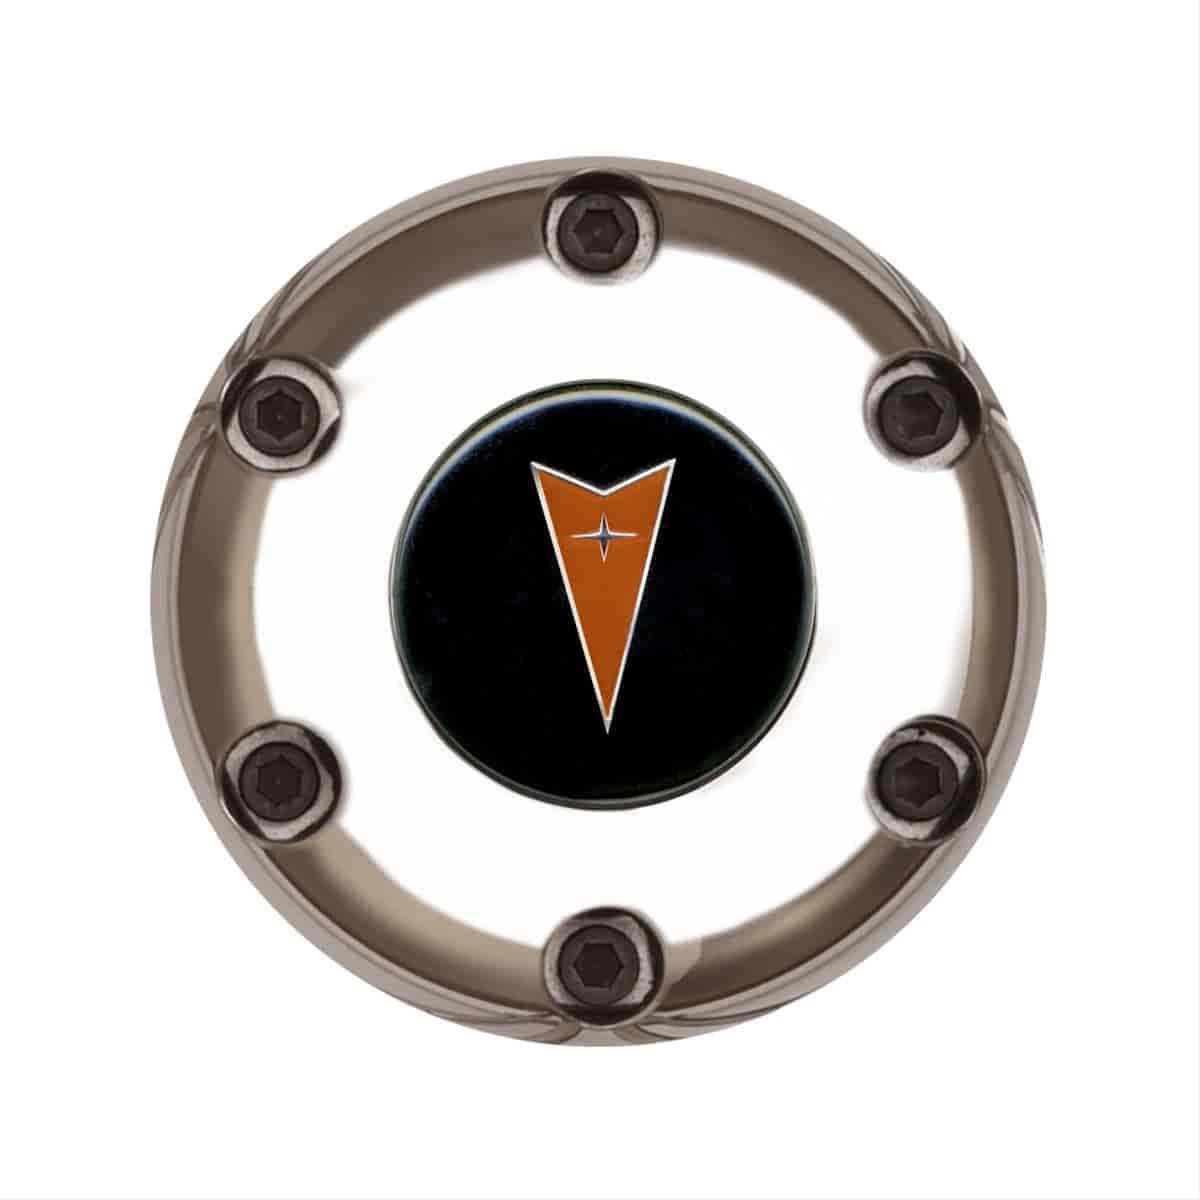 GT3 Gasser/Euro Style Horn Button Pontiac Logo Colored 6-Hole Style Style Polished with Black Center